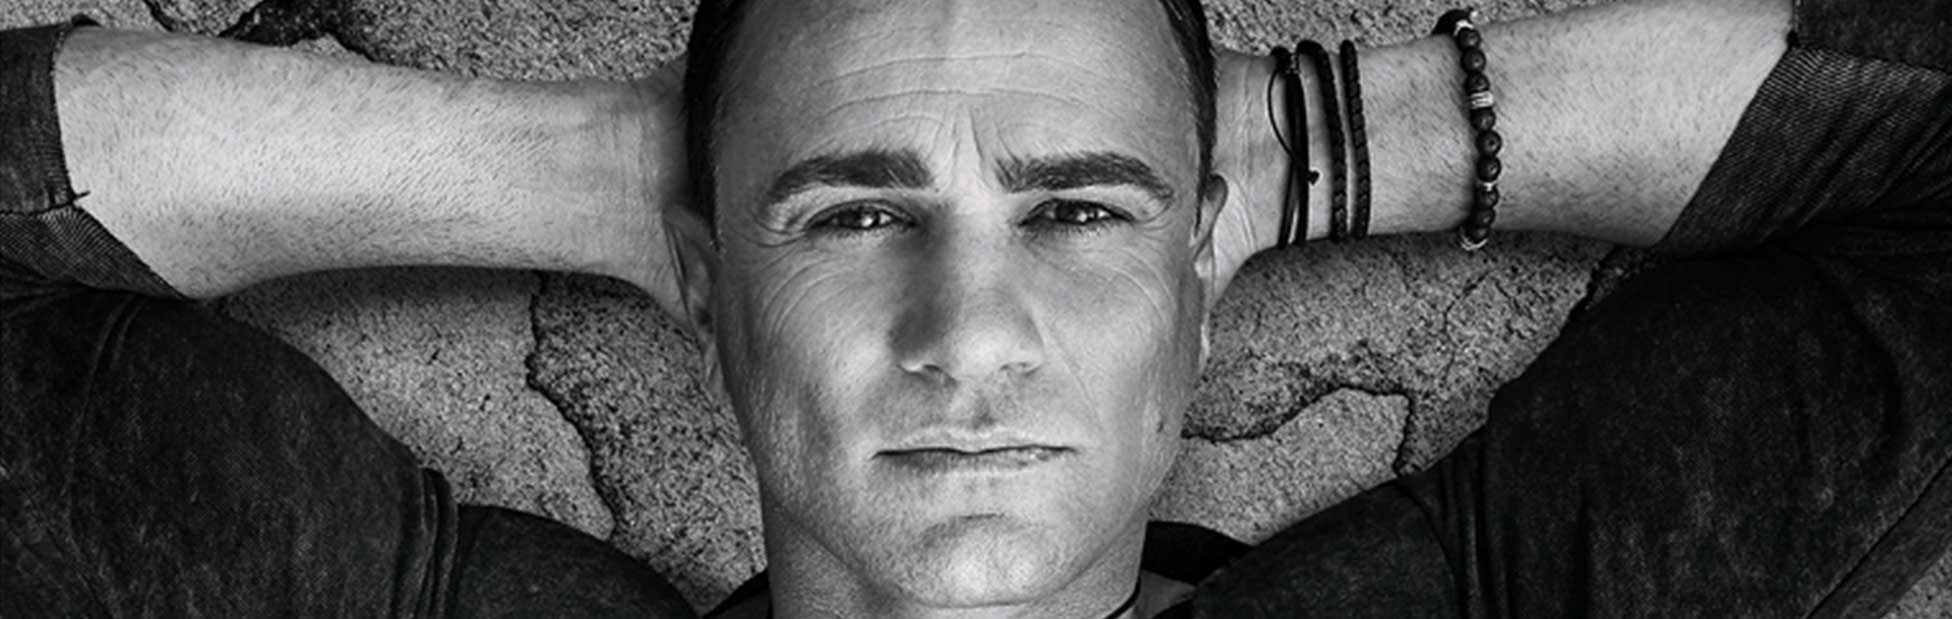 Shannon Noll lying on his back hands on head looking up